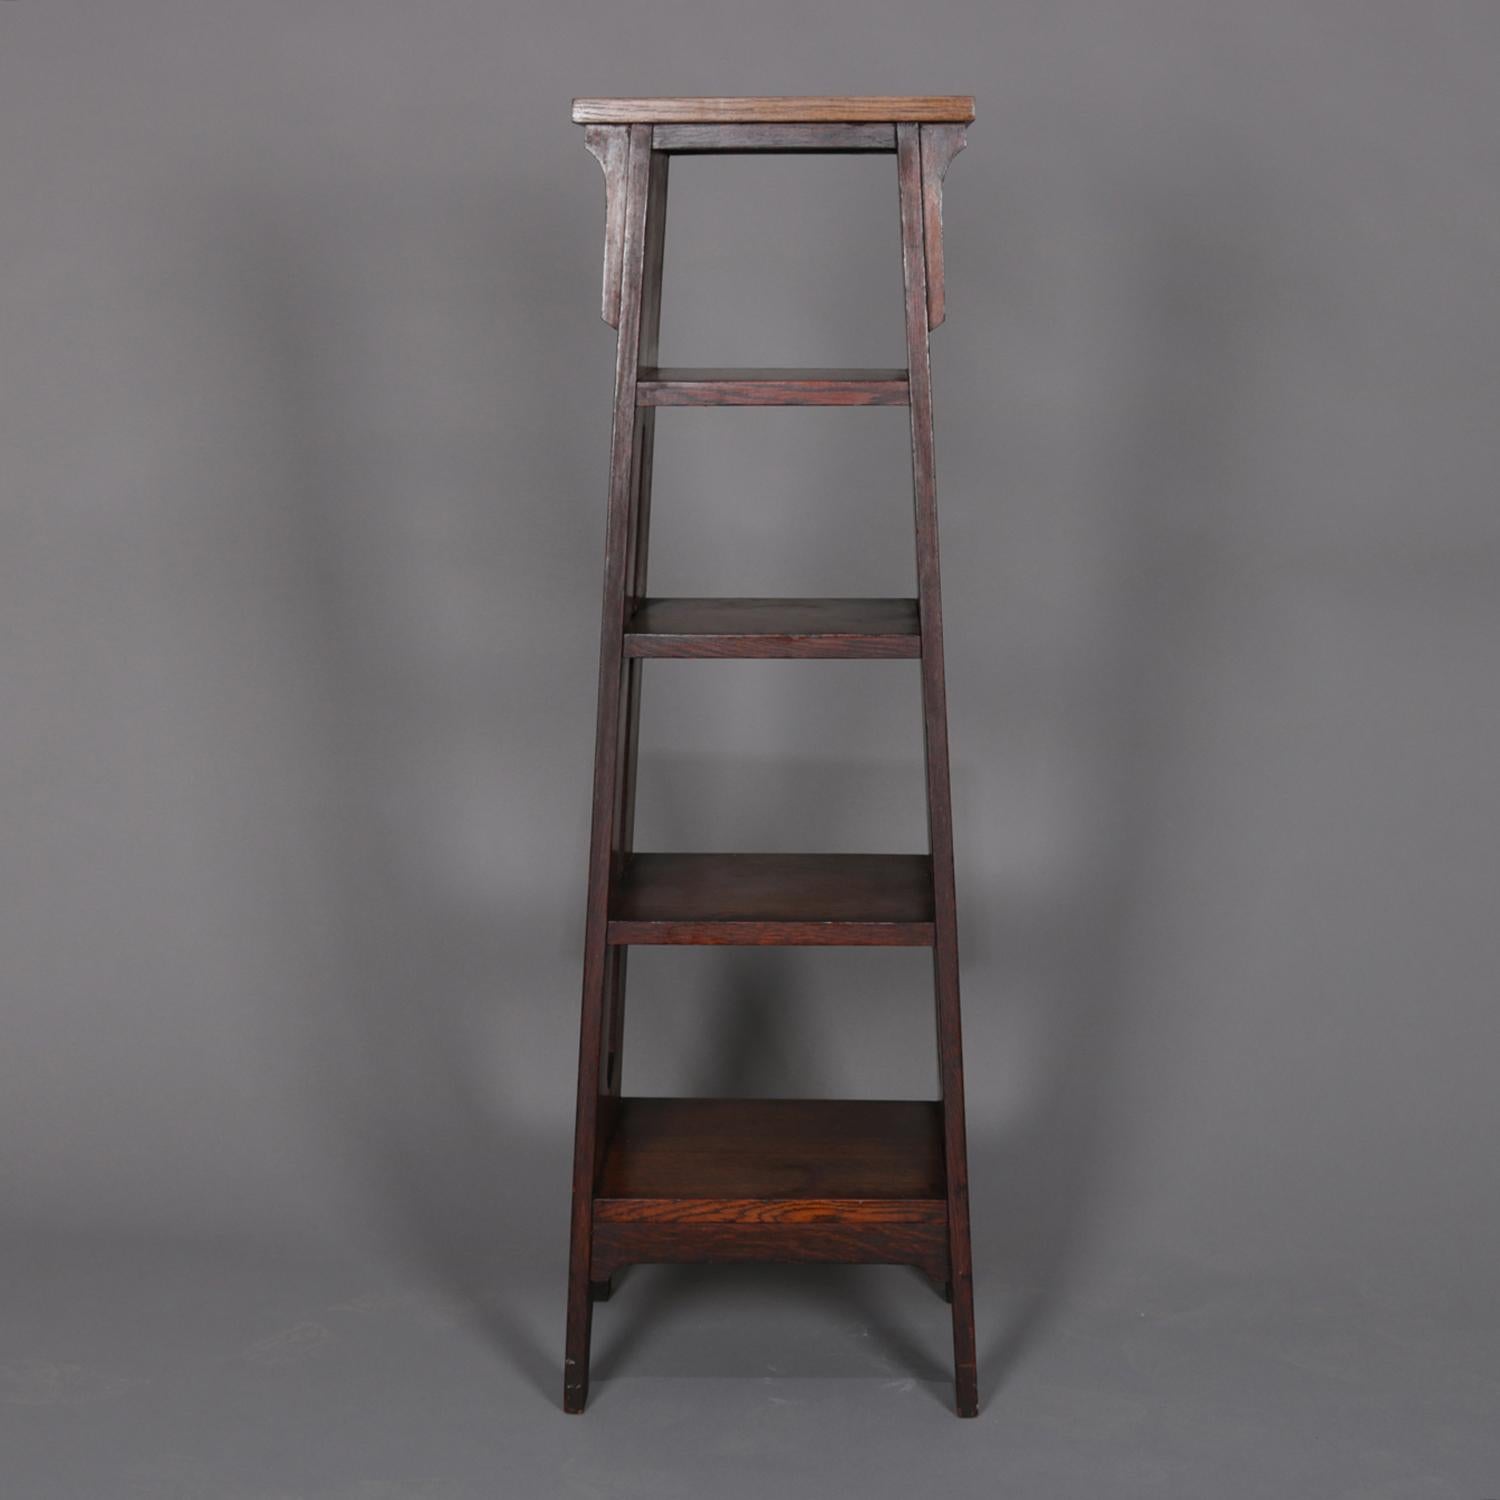 An antique Arts & Crafts stickley school mission oak school book stand features tapered form with graduated shelving and cut out sides, circa 1910.

Measures: 44